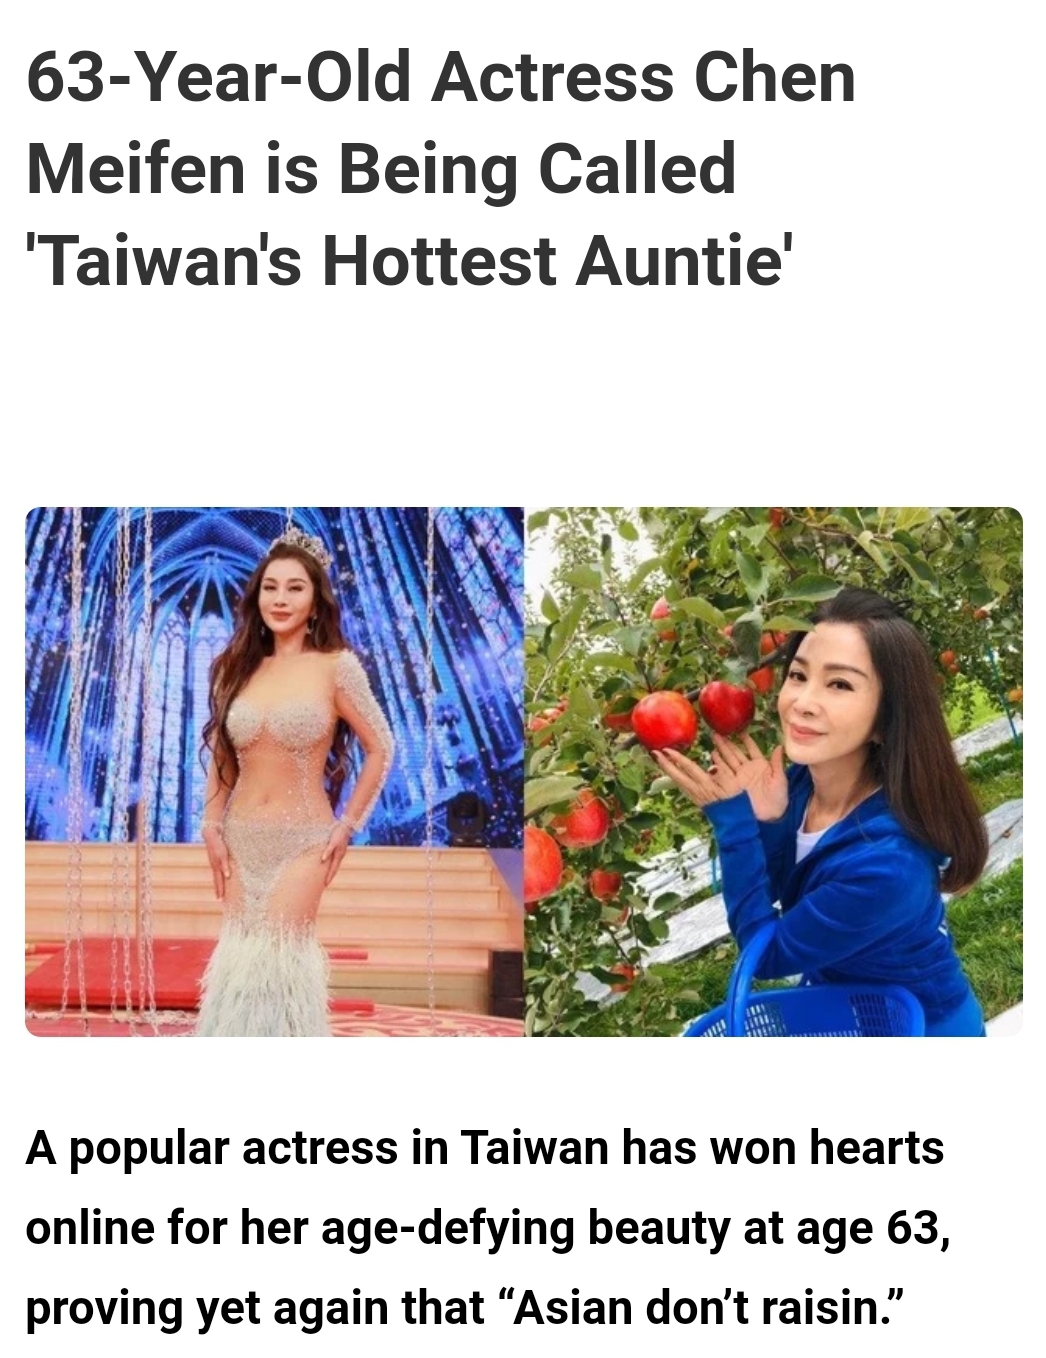 dress - 63YearOld Actress Chen Meifen is Being Called 'Taiwan's Hottest Auntie' A popular actress in Taiwan has won hearts online for her agedefying beauty at age 63, proving yet again that "Asian don't raisin.